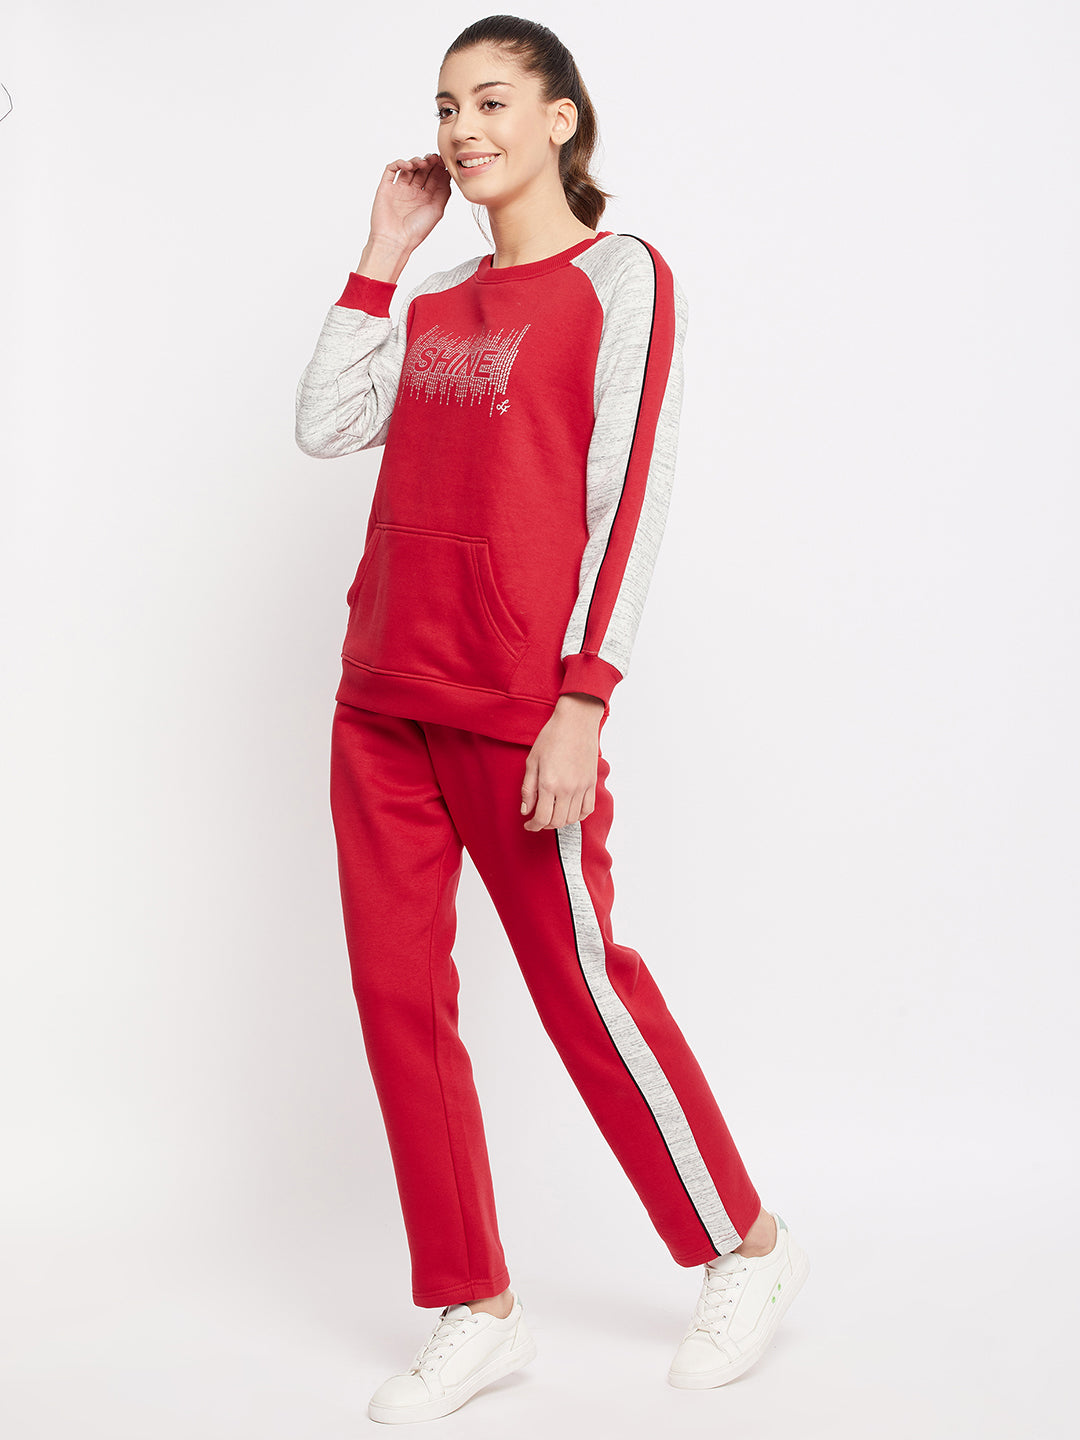 Livfree Round Neck Full Sleeve Typographic printed Women winter tracksuit- Red